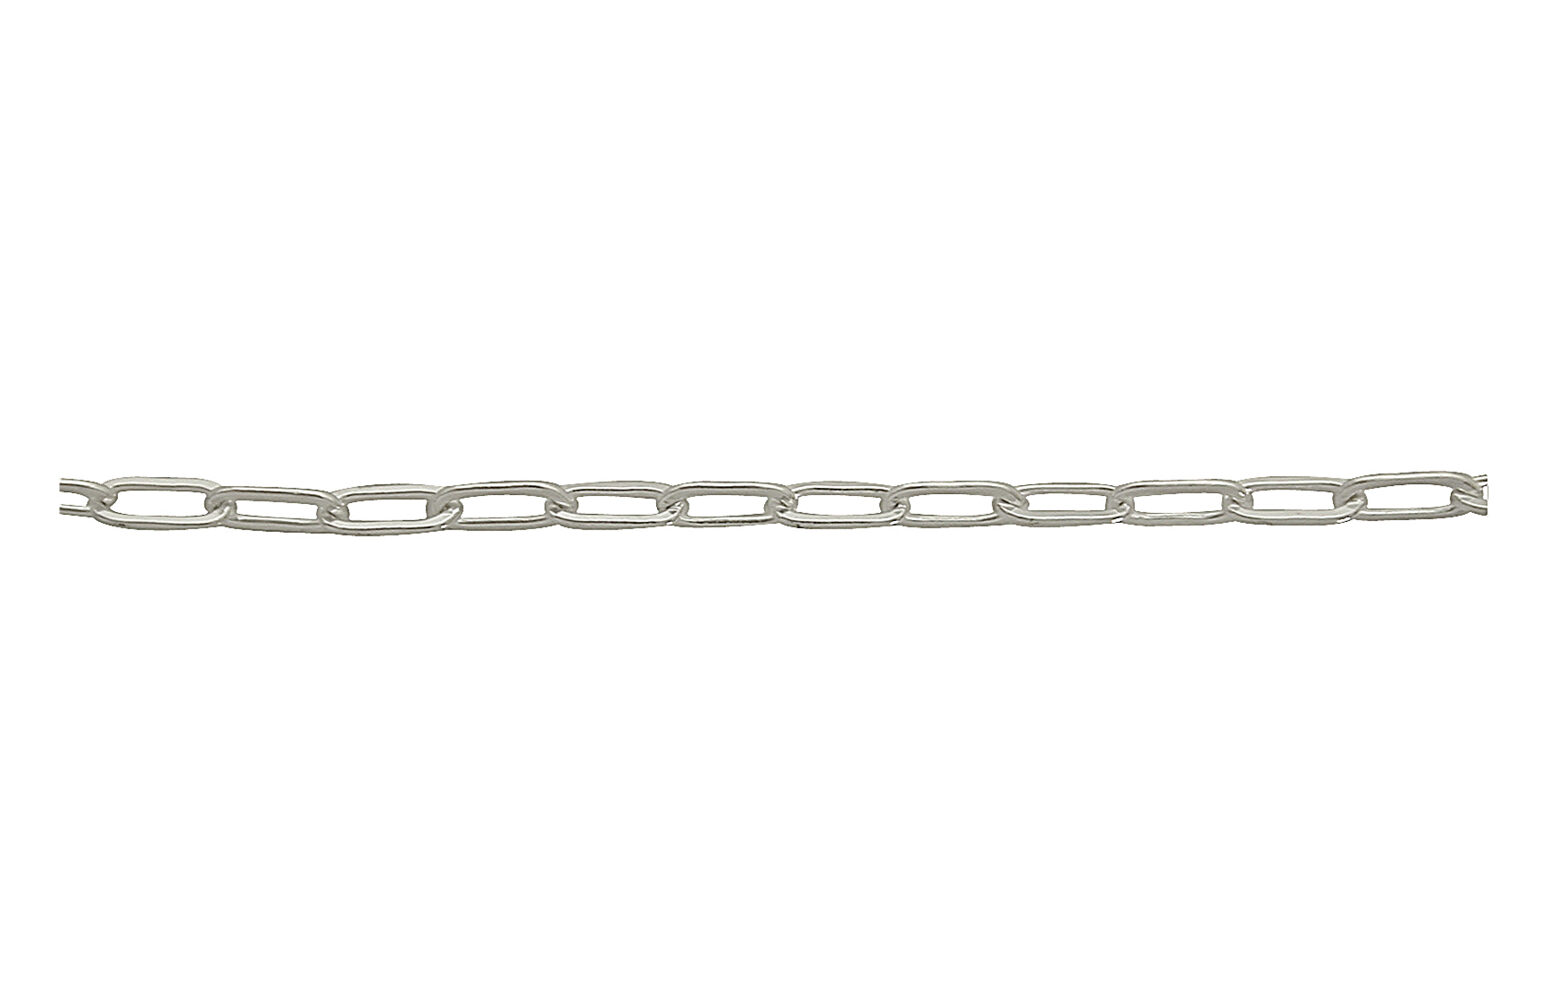 Wholesale Silver Necklace-sterling Silver Tiny Cable Oval Necklace Chain-bulk  Necklace Chains-save 30%26 Inches 30 Chains SKU: 601009-26 